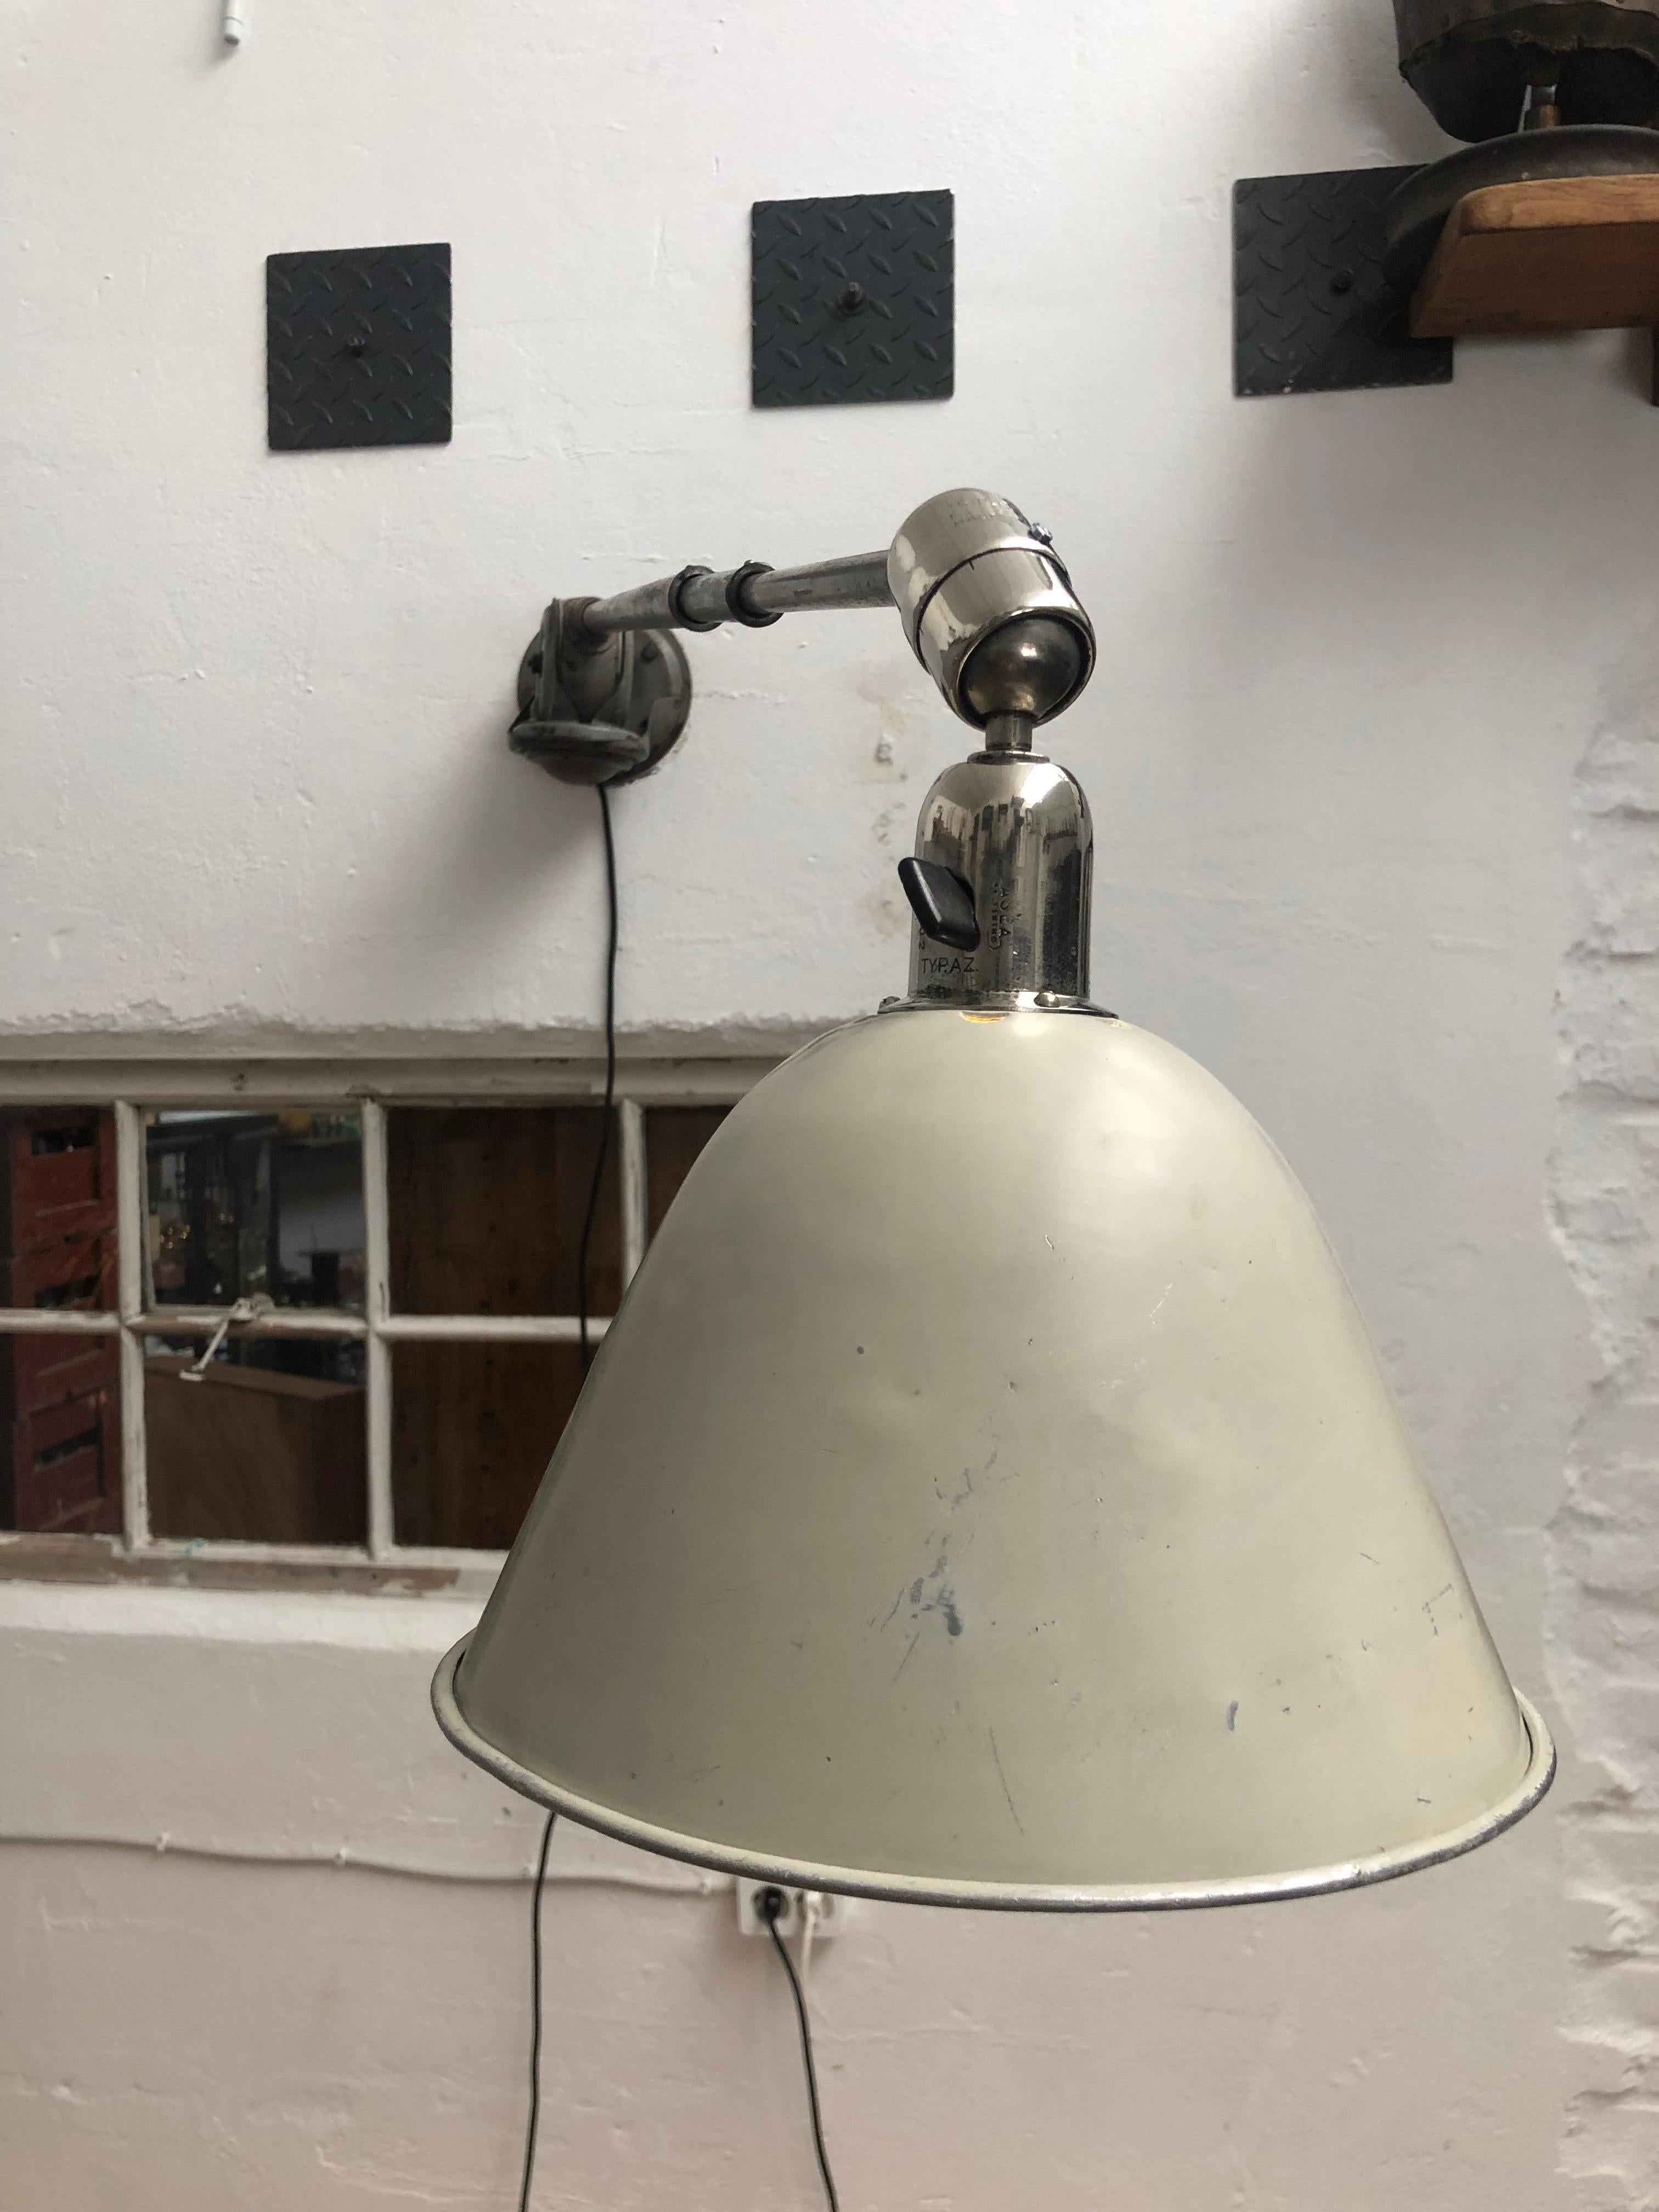 Hand-Crafted Classic Vintage Triplex Work Lamp by Johan Petter Johansson for ASEA of Sweden For Sale